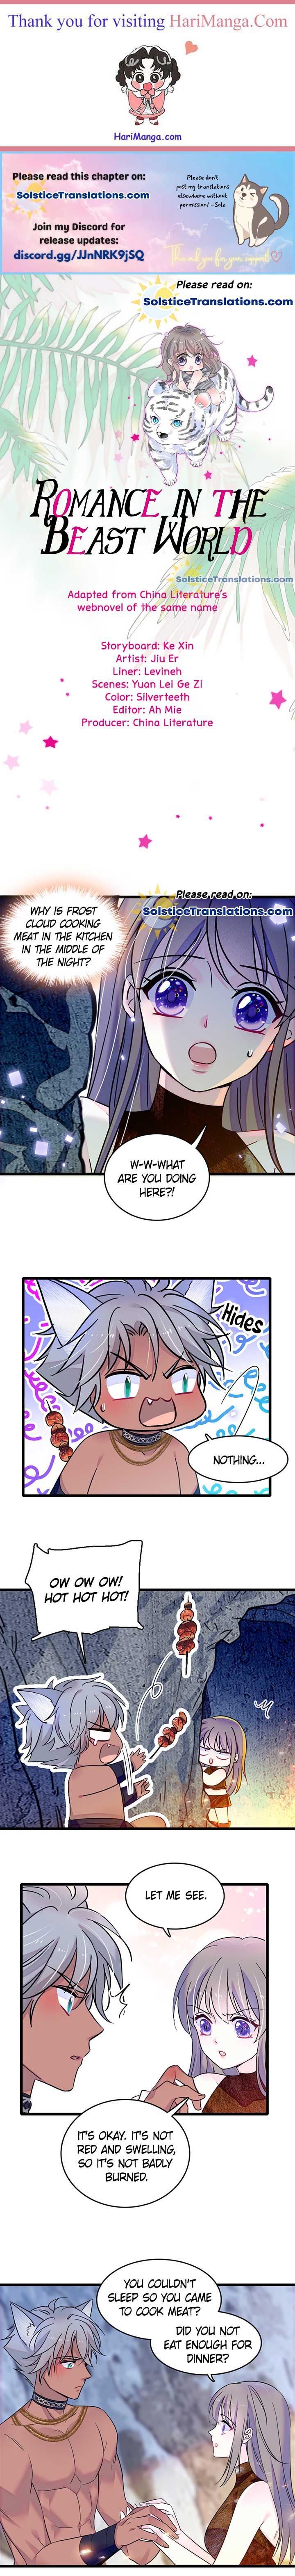 Romance in the Beast World Chapter 41 page 1